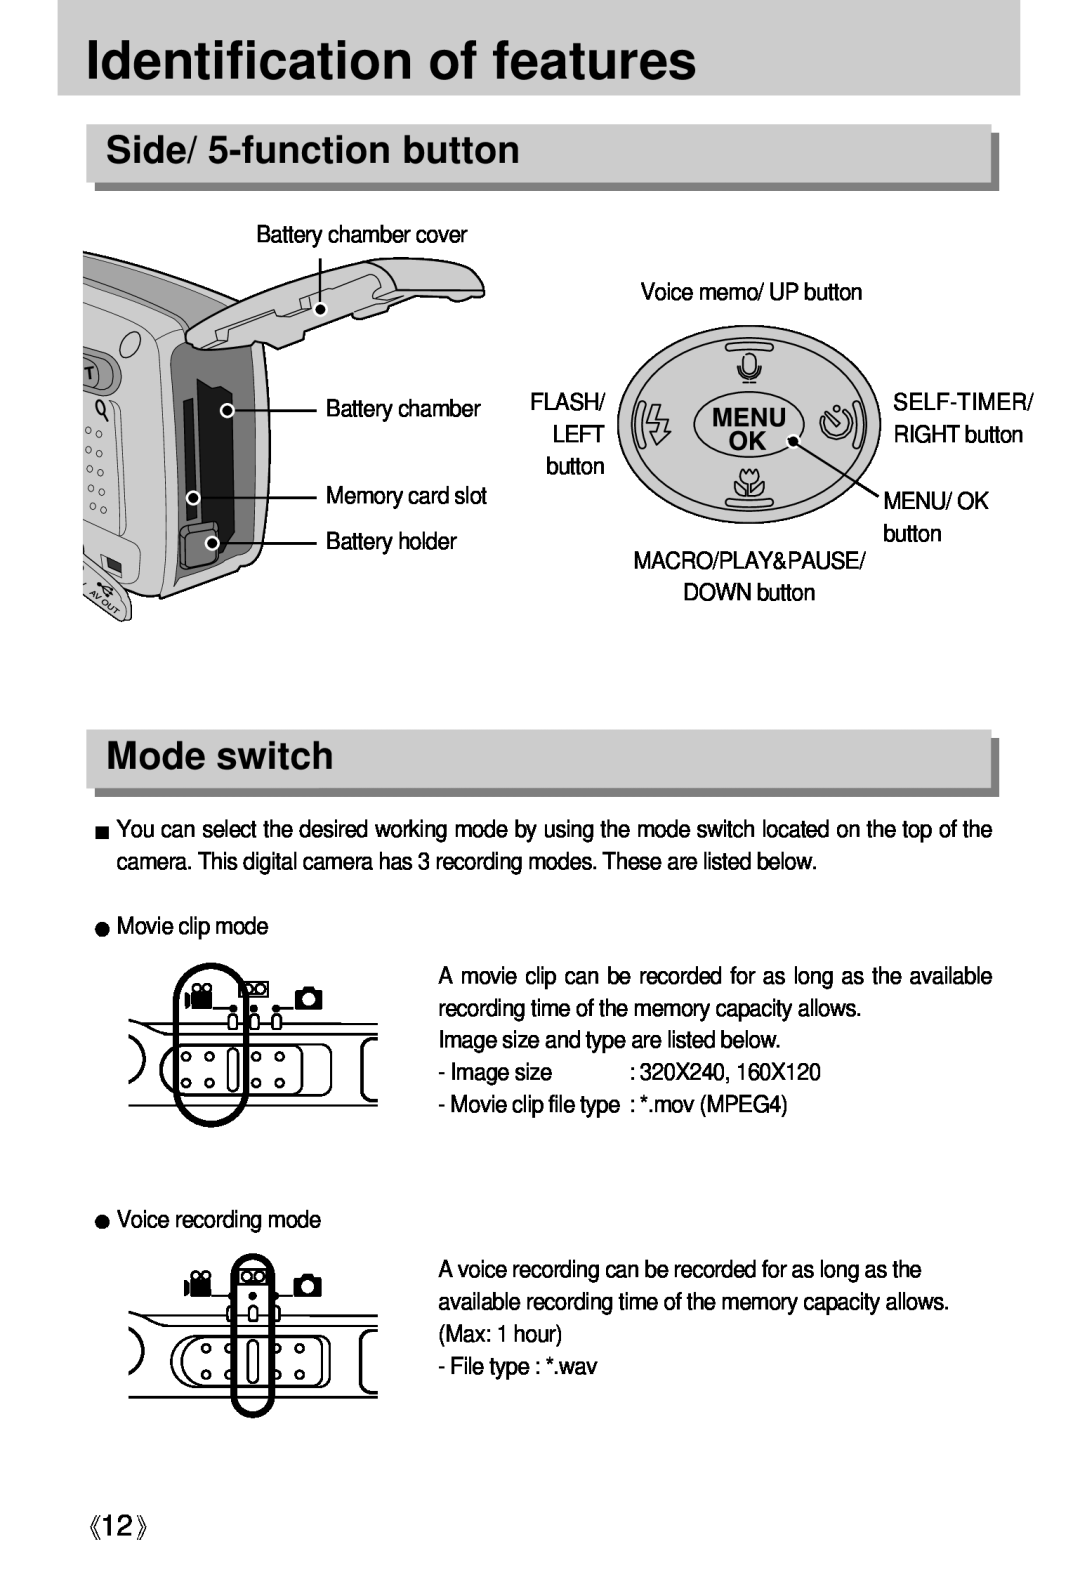 Samsung Digimax U-CA user manual Side/ 5-function button, Mode switch, Identification of features 